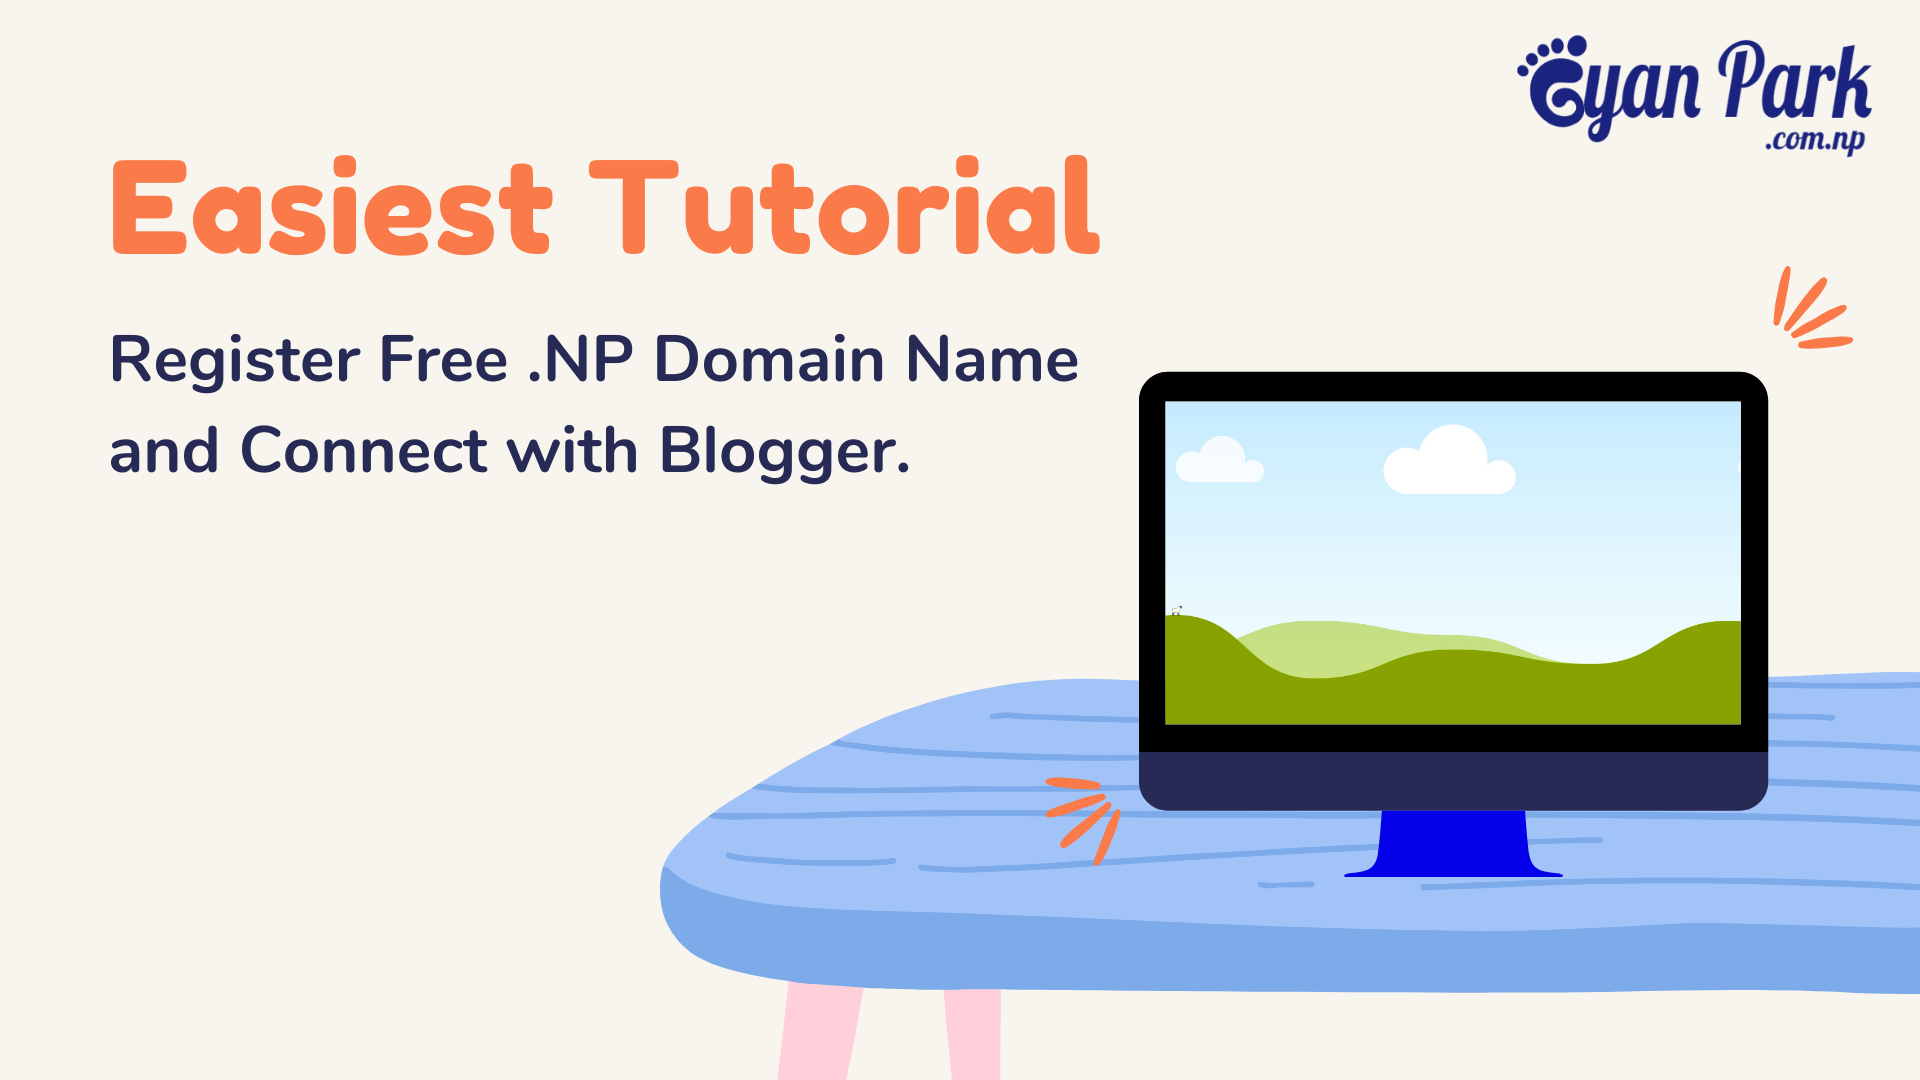 Register Free .NP Domain Name and Connect with Blogger (Easiest Tutorial) -  Gyan Park › A Genuine Resource